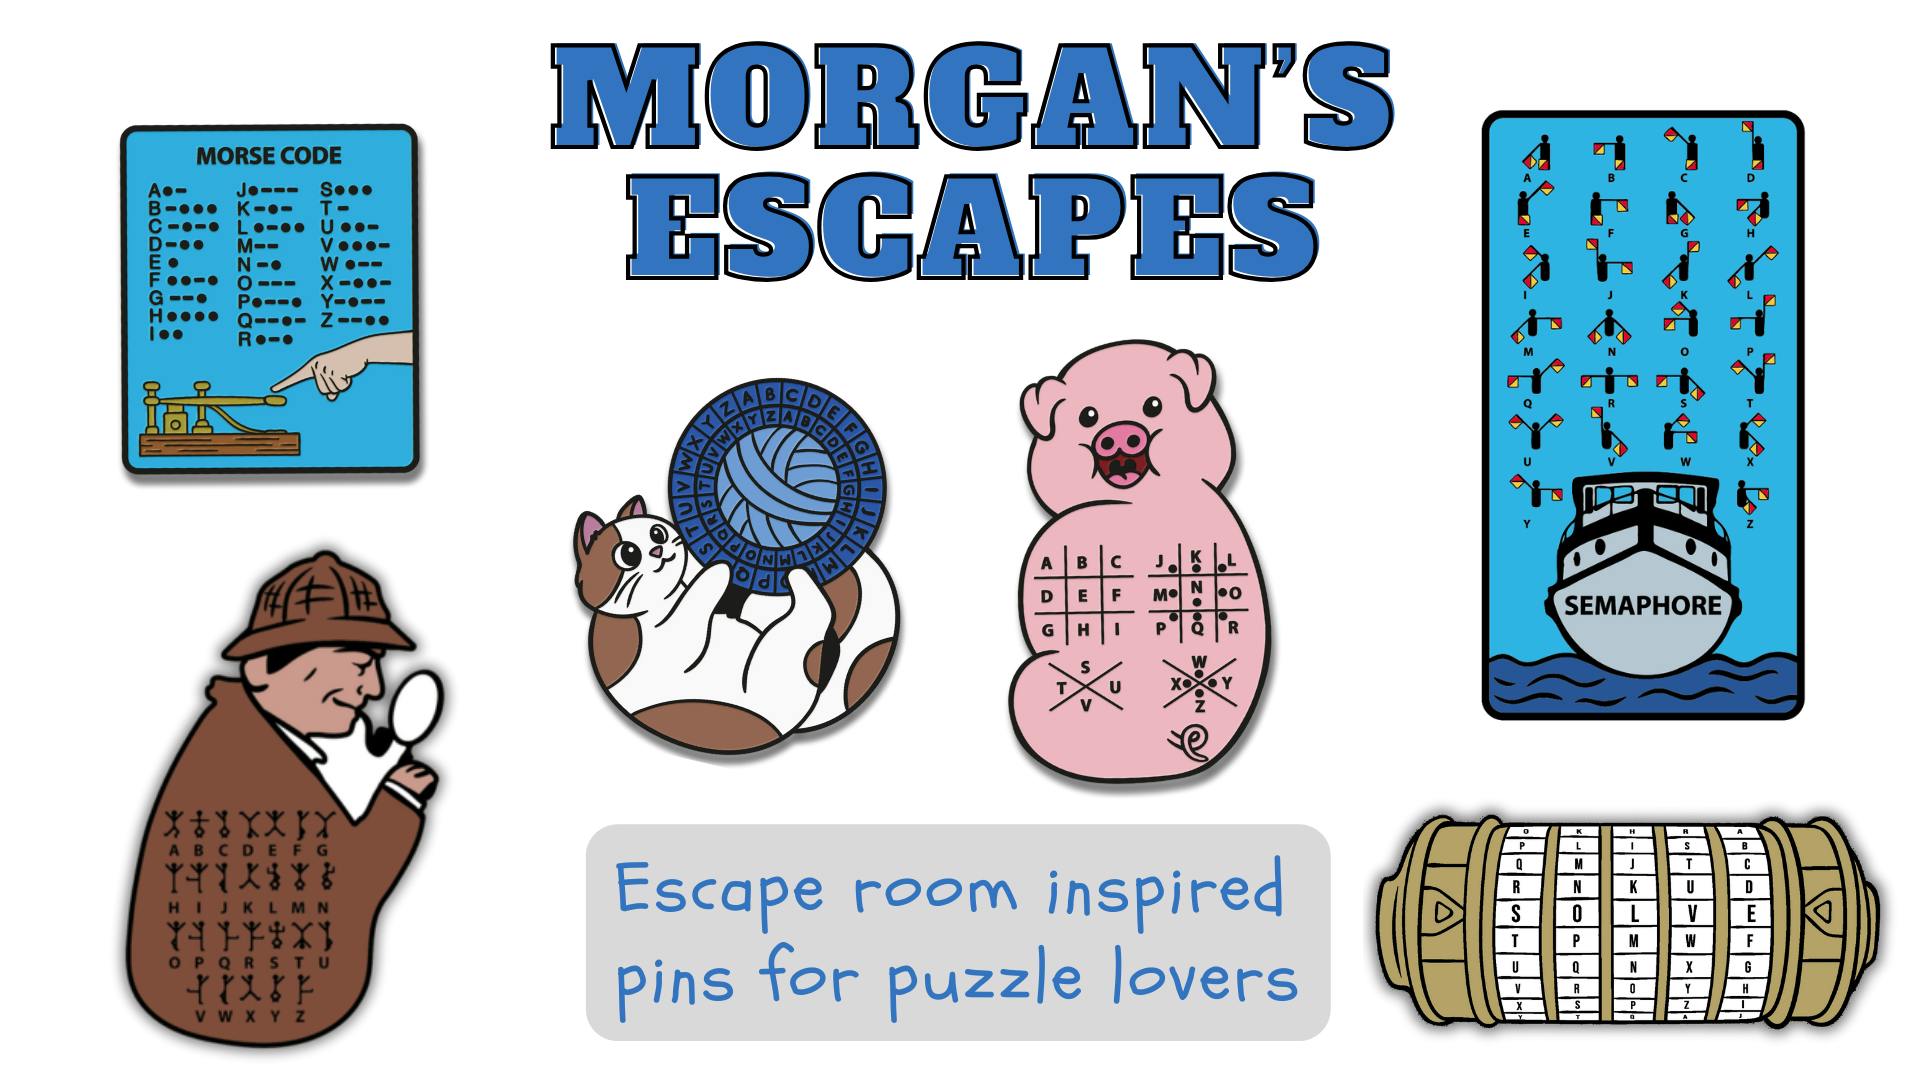 Escape room inspired pins for puzzle lovers